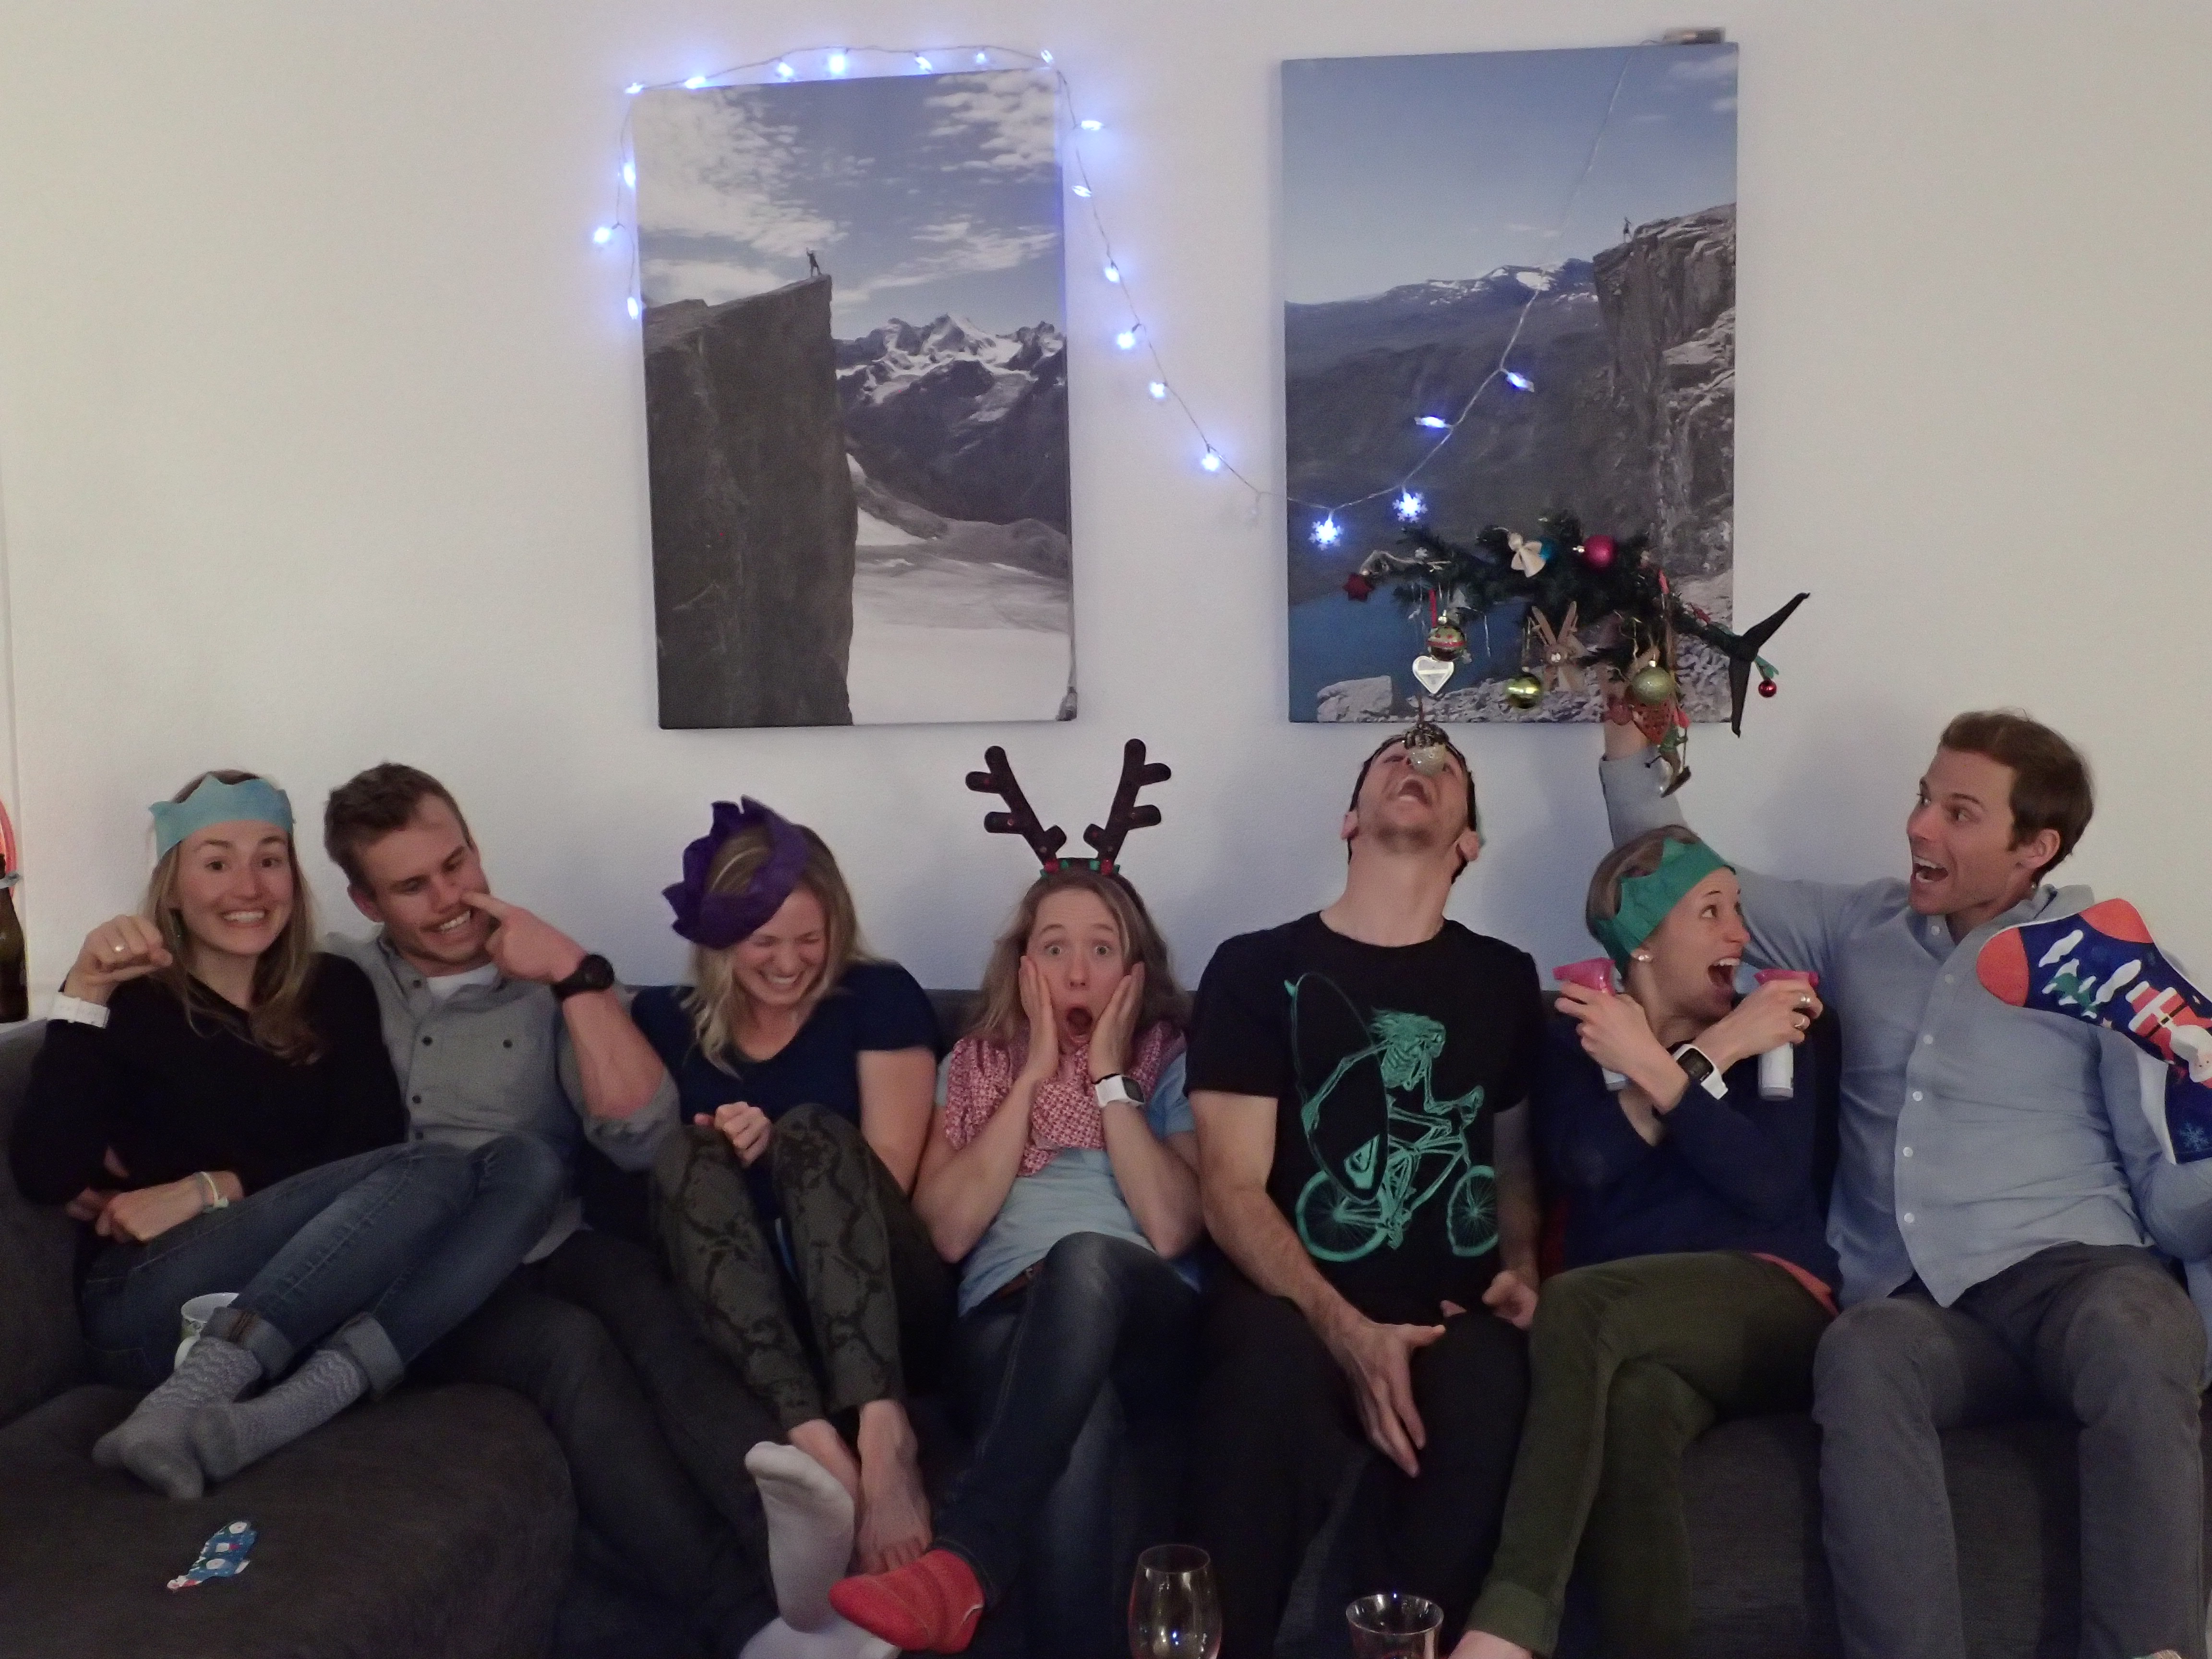 A Davos Christmas, from our ski family to yours.